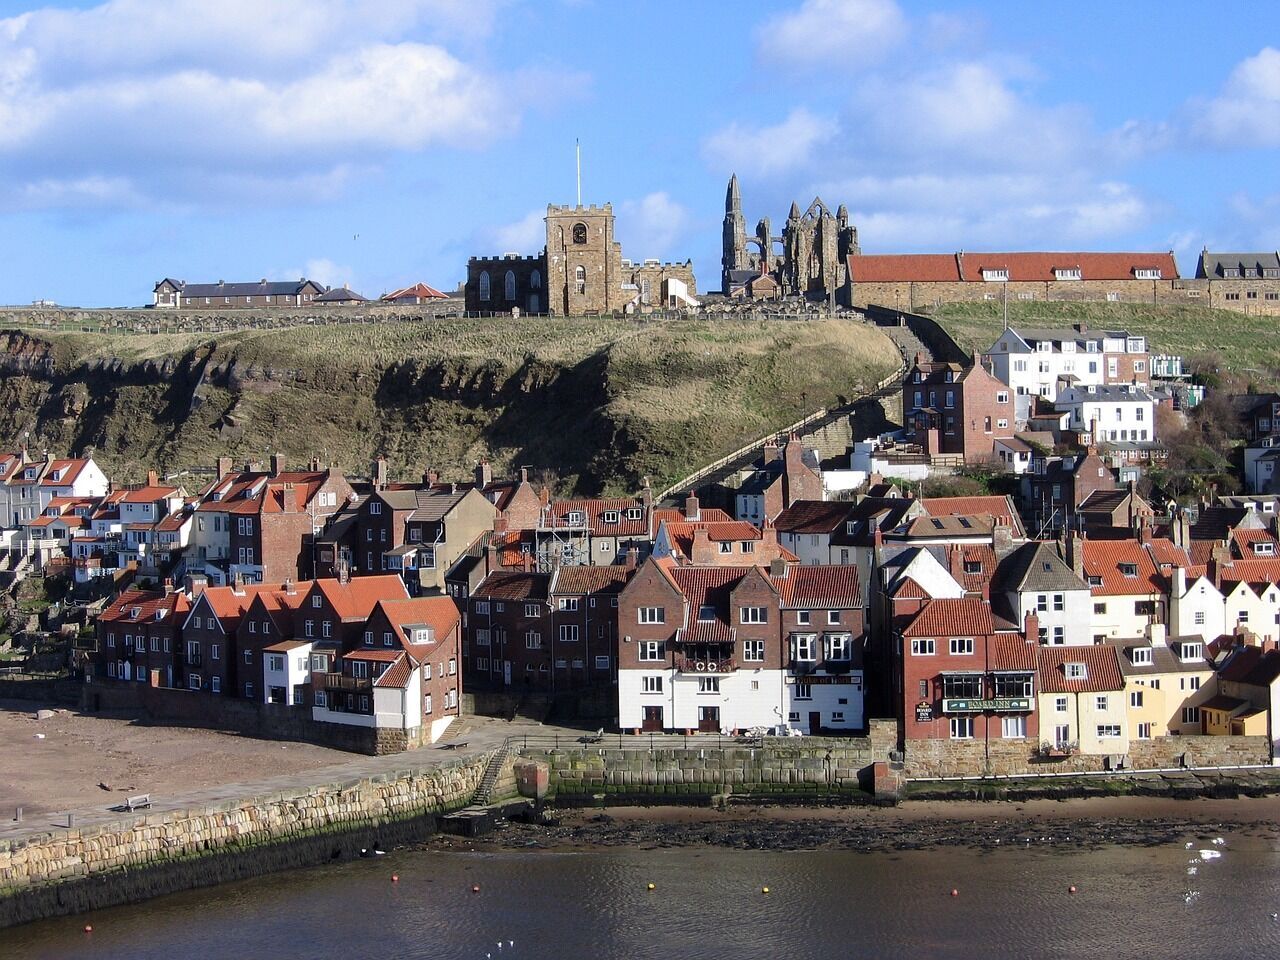 "The most beautiful" seaside town in the UK has been named one of the best places to visit